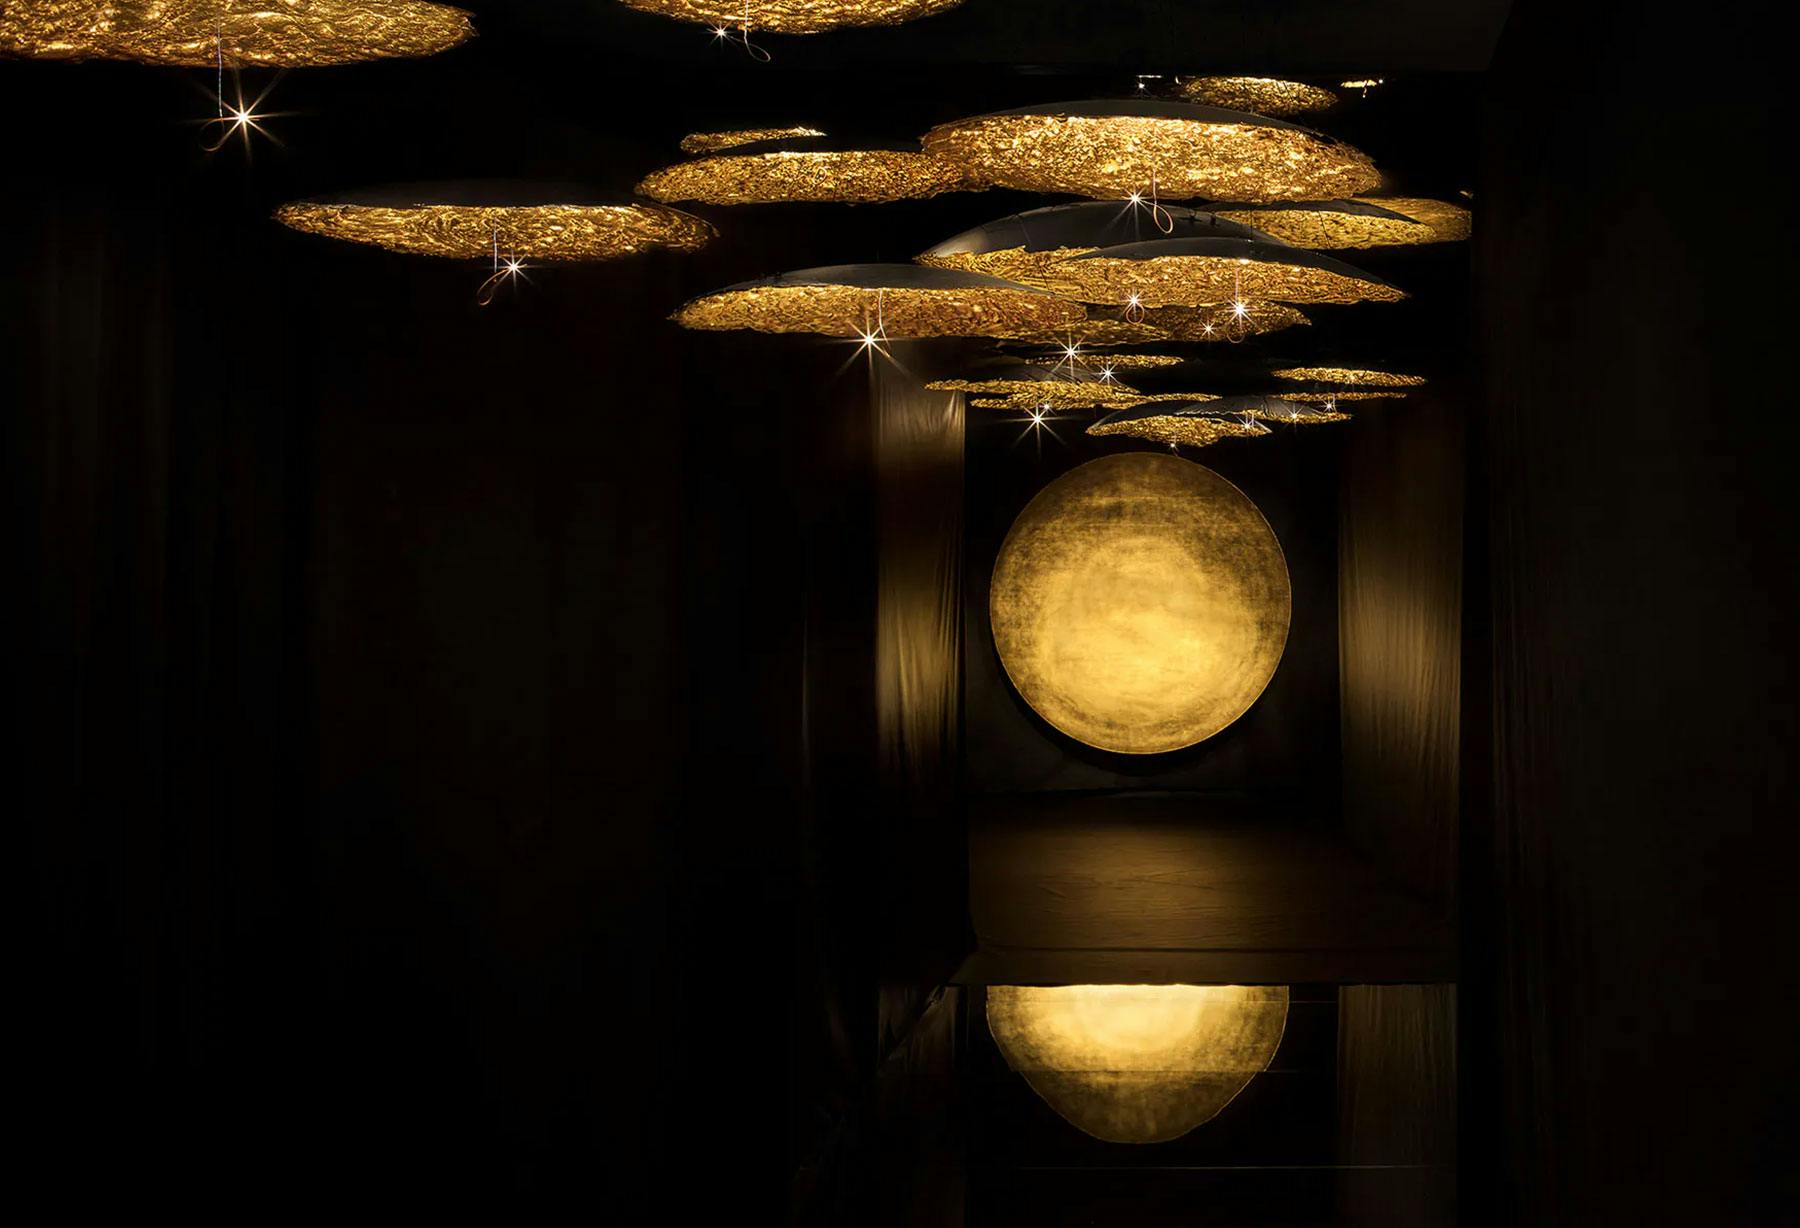 <p>“Resonance” by Enzo Catellani is an emotional and immersive walk through lights and sounds, created by more than 50 discs of different size covered in gold coloured leaf and lit by micro LEDs, hanging at different heights. With this project for the Fuori Salone in Milan, Enzo Catellani creates a clever balance of music, light and shade: a fascinating atmosphere that fills the eyes of visitors with wonder and leads them in discovery of light, in a “new light”.</p>
